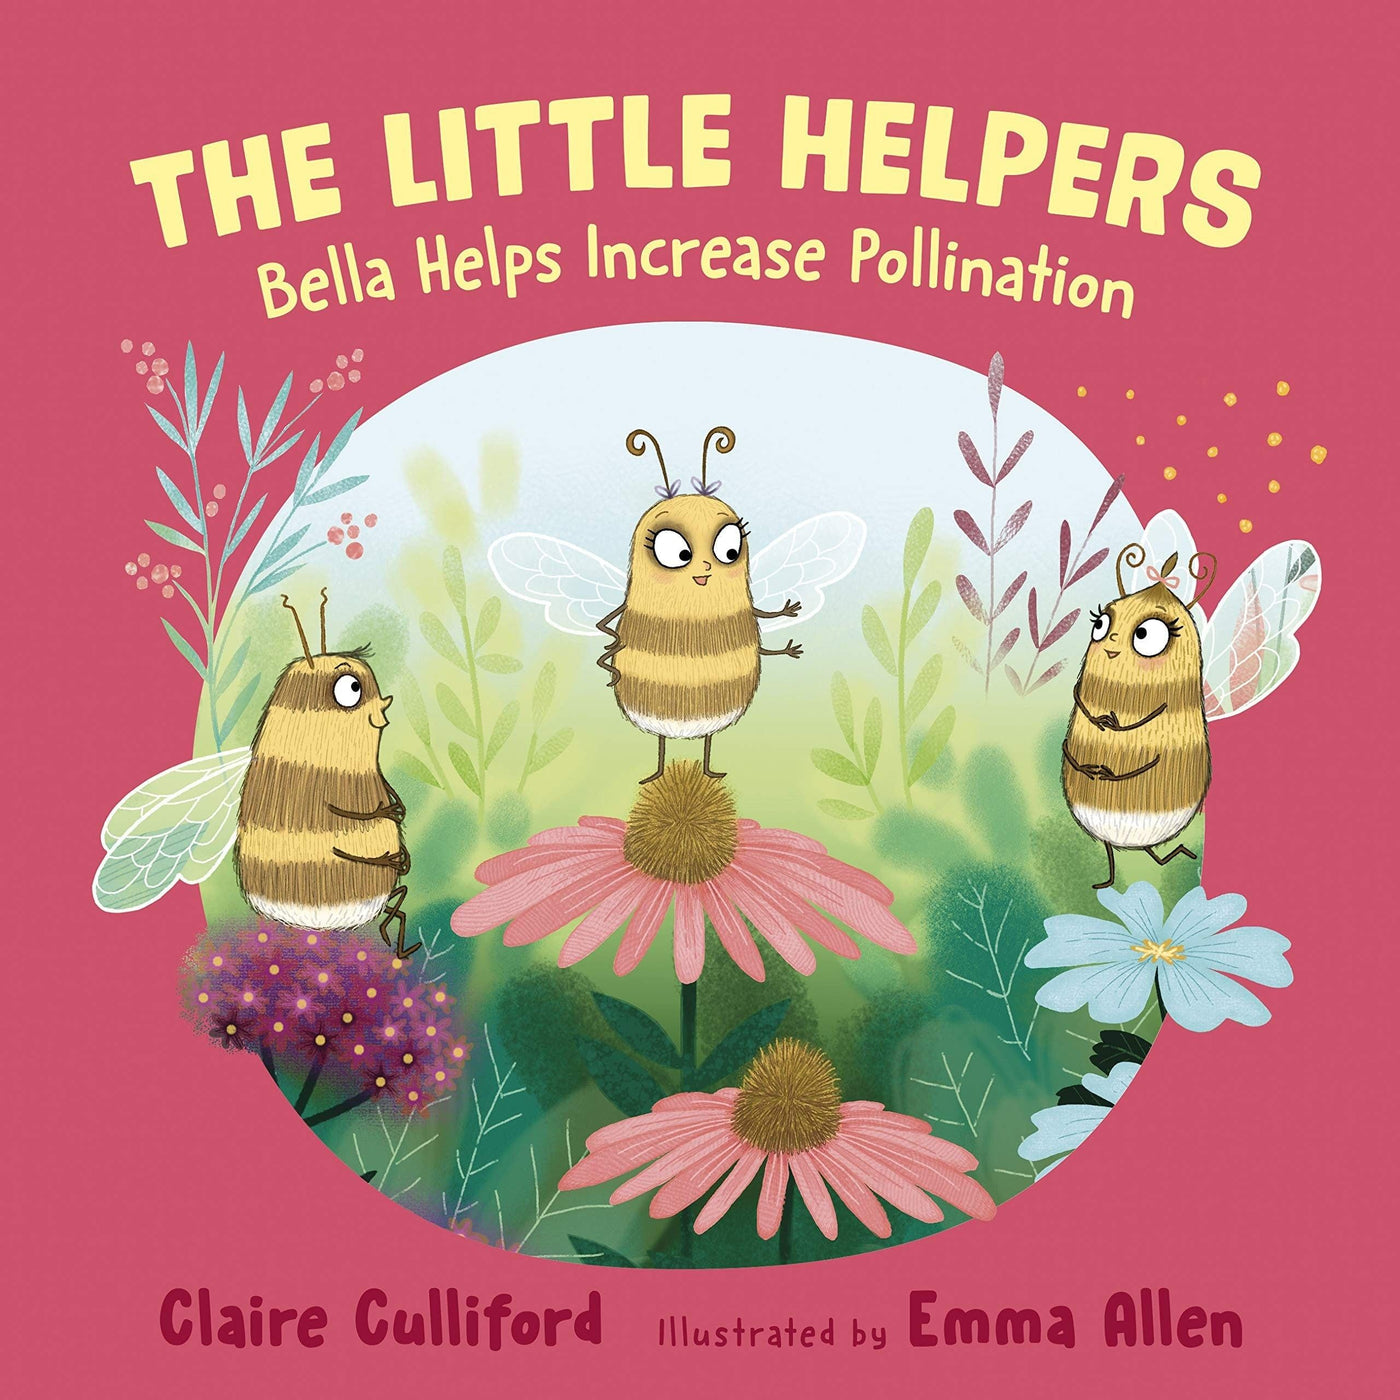 The Little Helpers: Bella Helps Increase Pollination: (A Climate-Conscious Children's Book) - Claire Culliford & Emma Allen